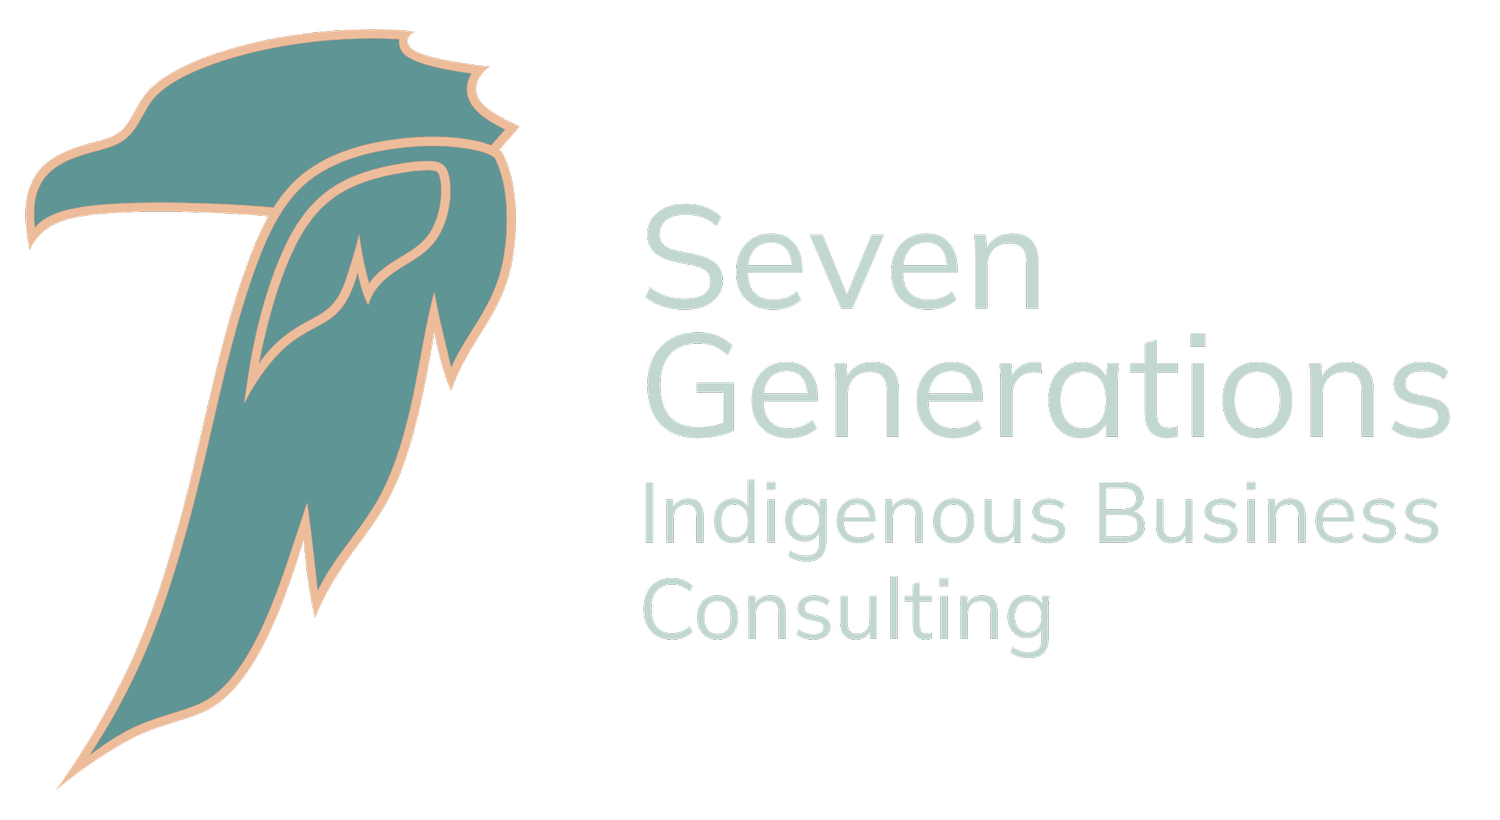 Seven Generations Indigenous Business Consulting